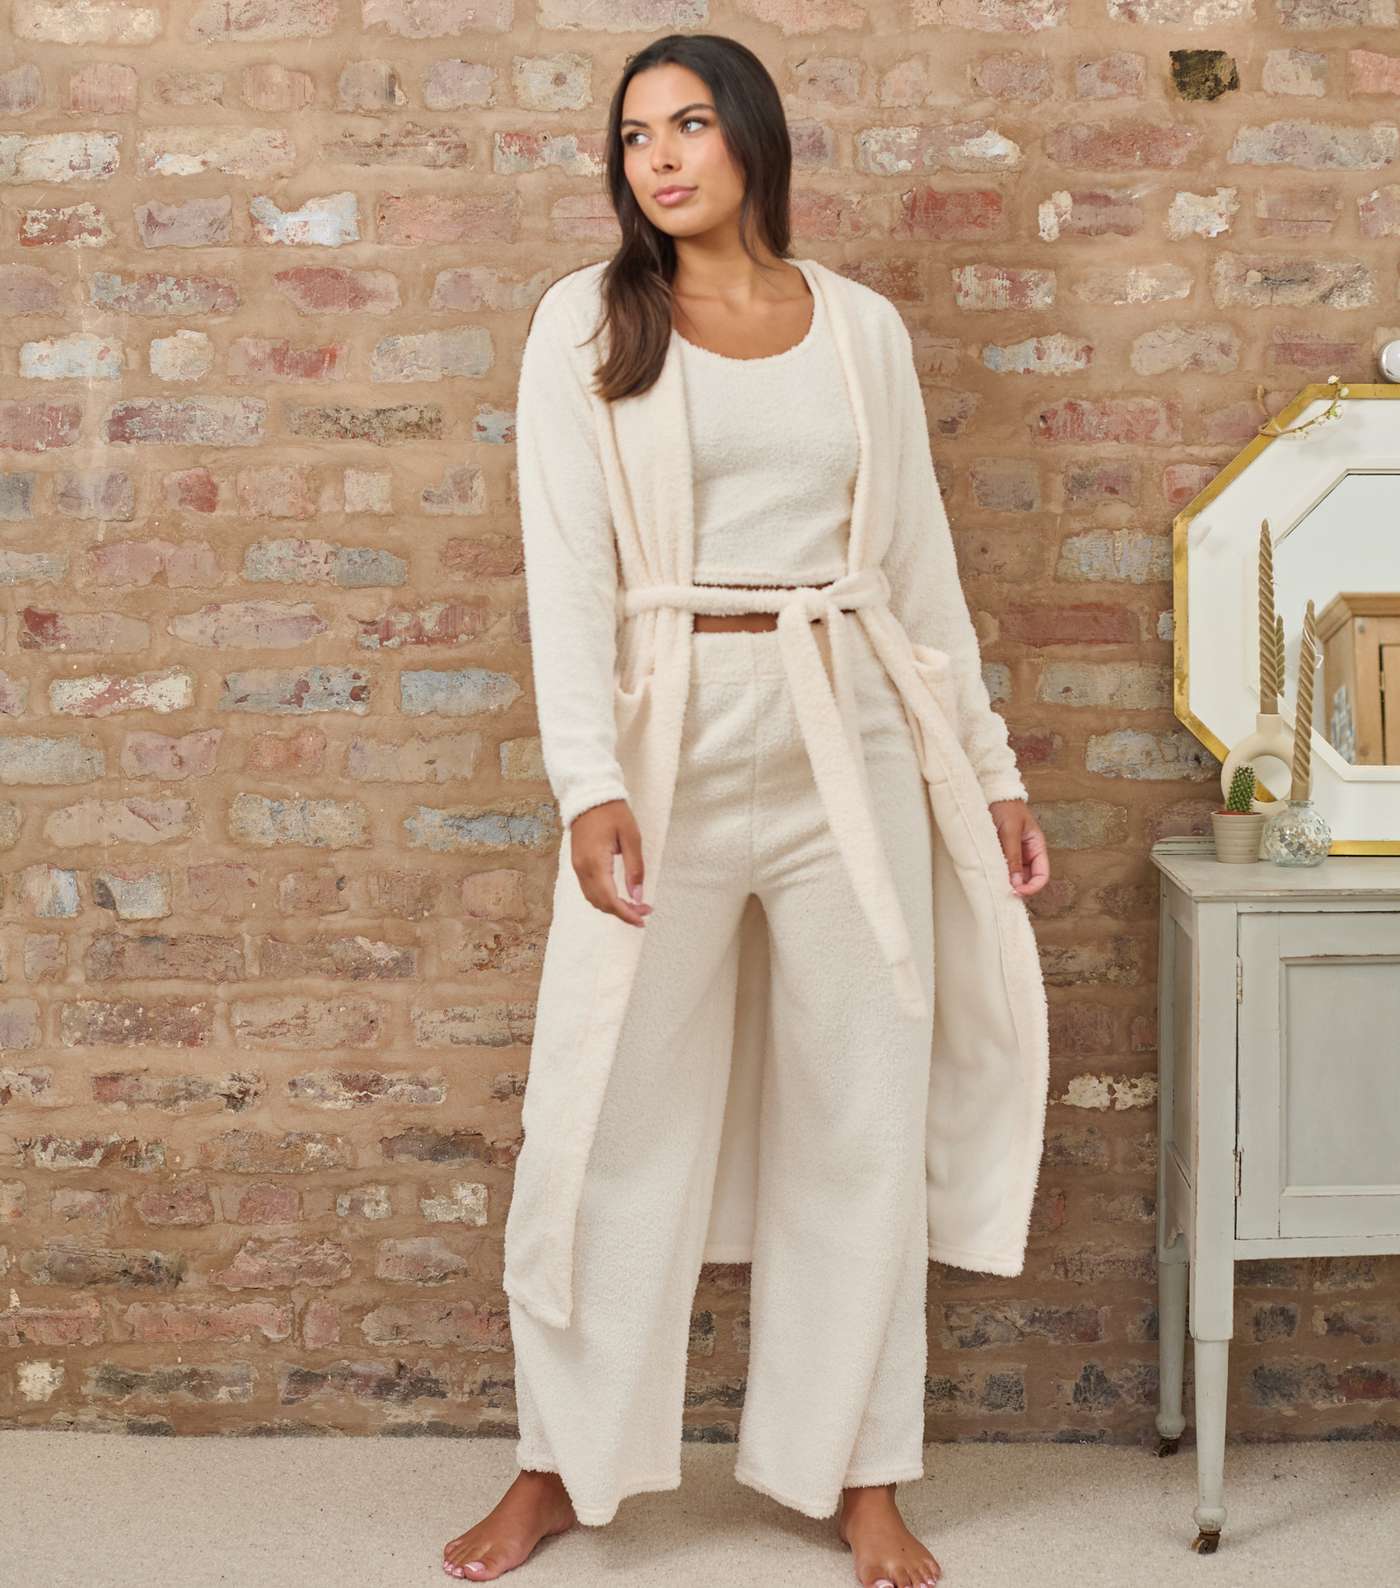 Loungeable Cream Soft Fuzzy Belted Longline Cardigan Image 2